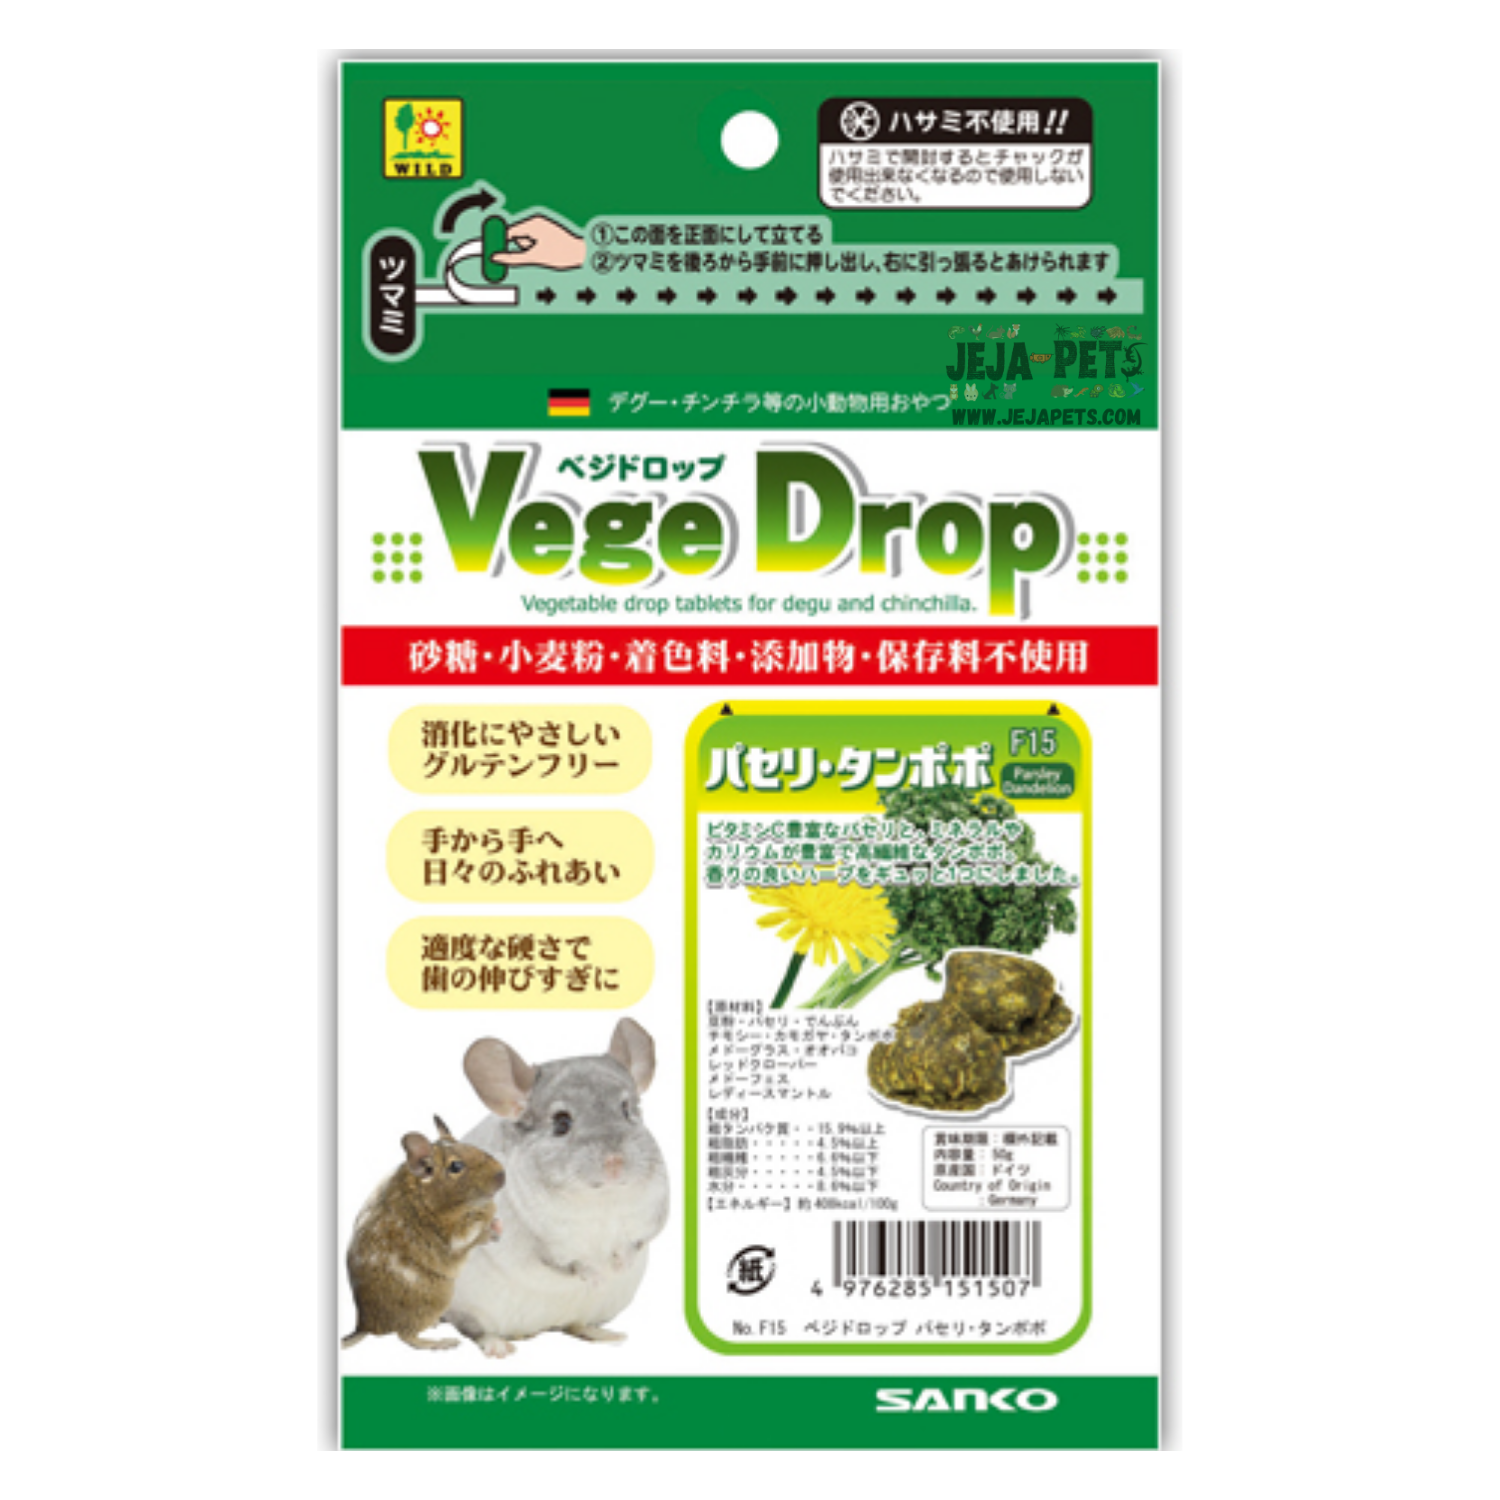 [DISCONTINUED] Sanko Wild Vegetable Drops Parsley and Dandelion - 50g